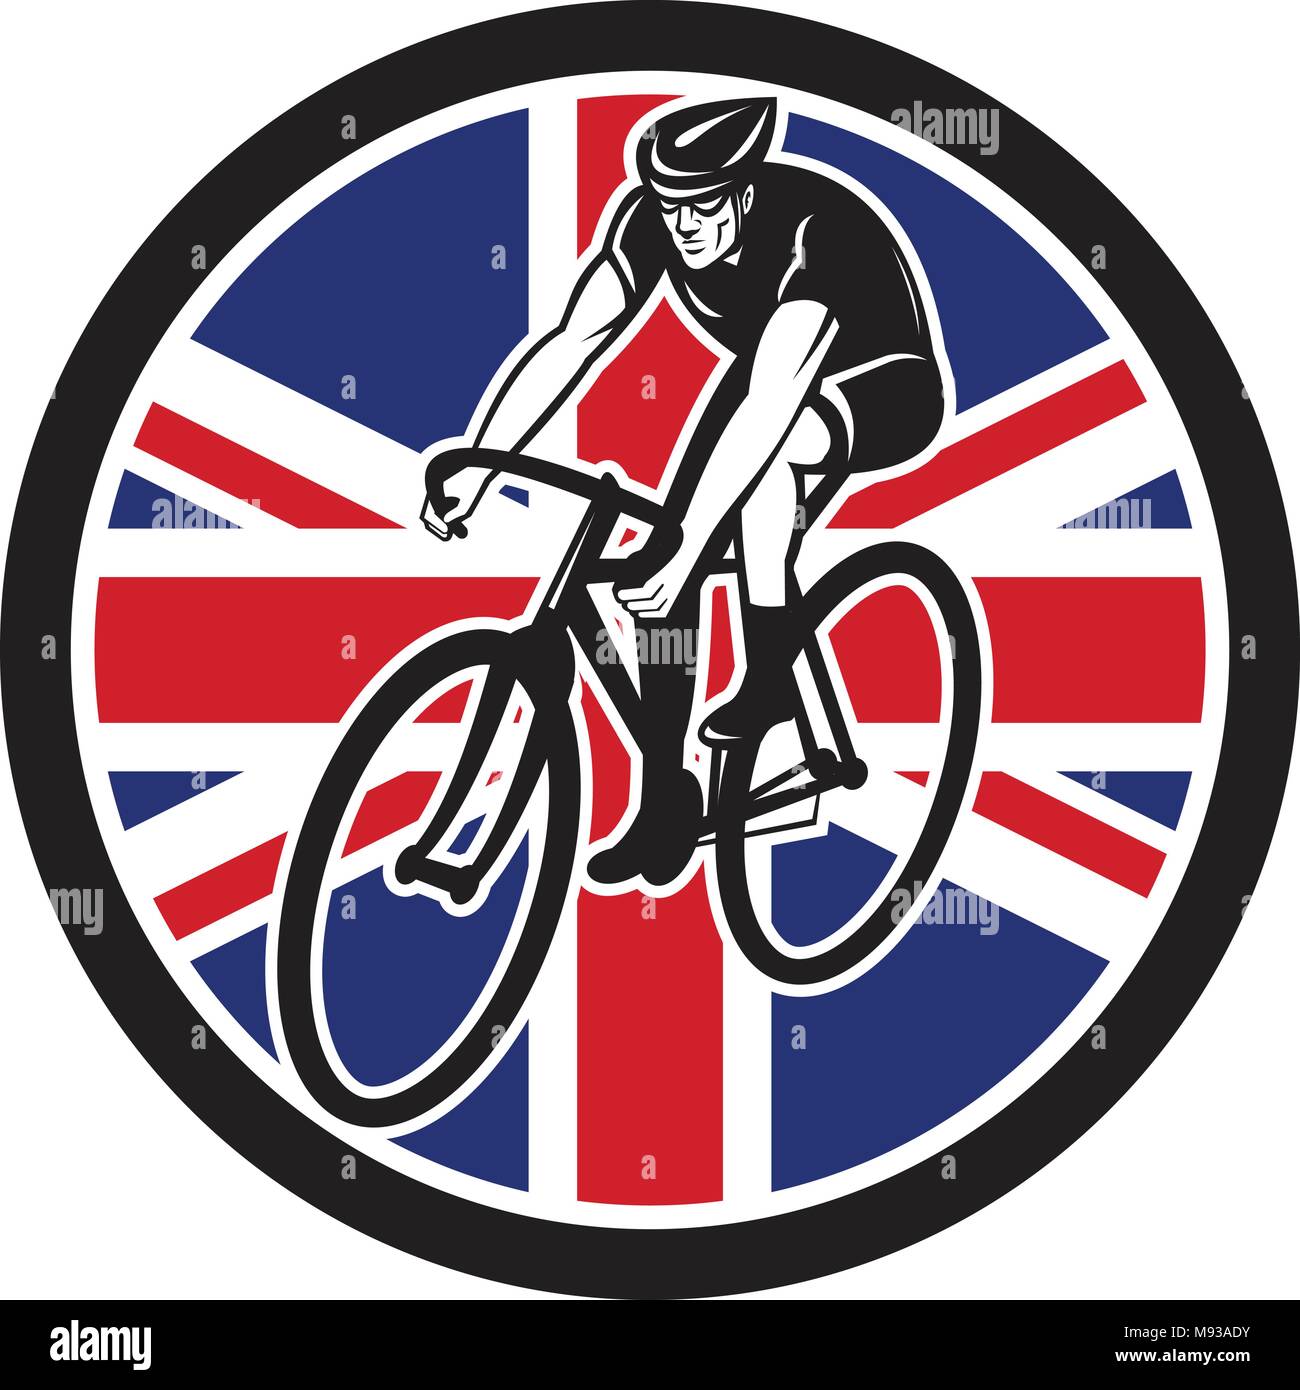 Icon retro style illustration of a British cyclist cycling riding road bike with United Kingdom UK, Great Britain Union Jack flag set inside circle on Stock Vector